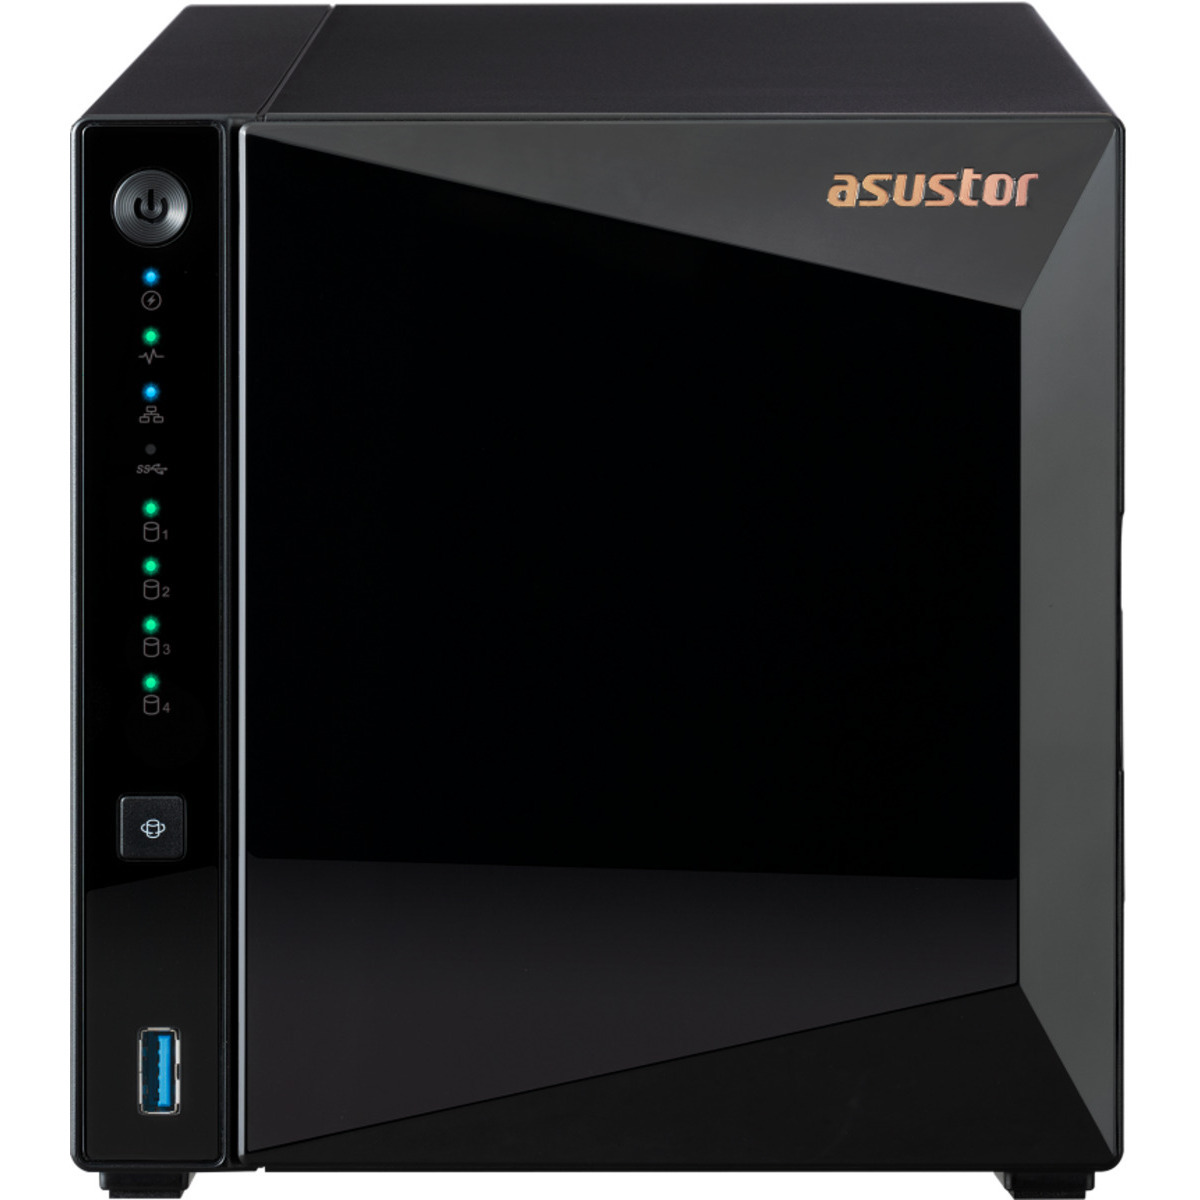 ASUSTOR DRIVESTOR 4 Pro AS3304T 96tb 4-Bay Desktop Personal / Basic Home / Small Office NAS - Network Attached Storage Device 4x24tb Seagate IronWolf Pro ST24000NT002 3.5 7200rpm SATA 6Gb/s HDD NAS Class Drives Installed - Burn-In Tested DRIVESTOR 4 Pro AS3304T